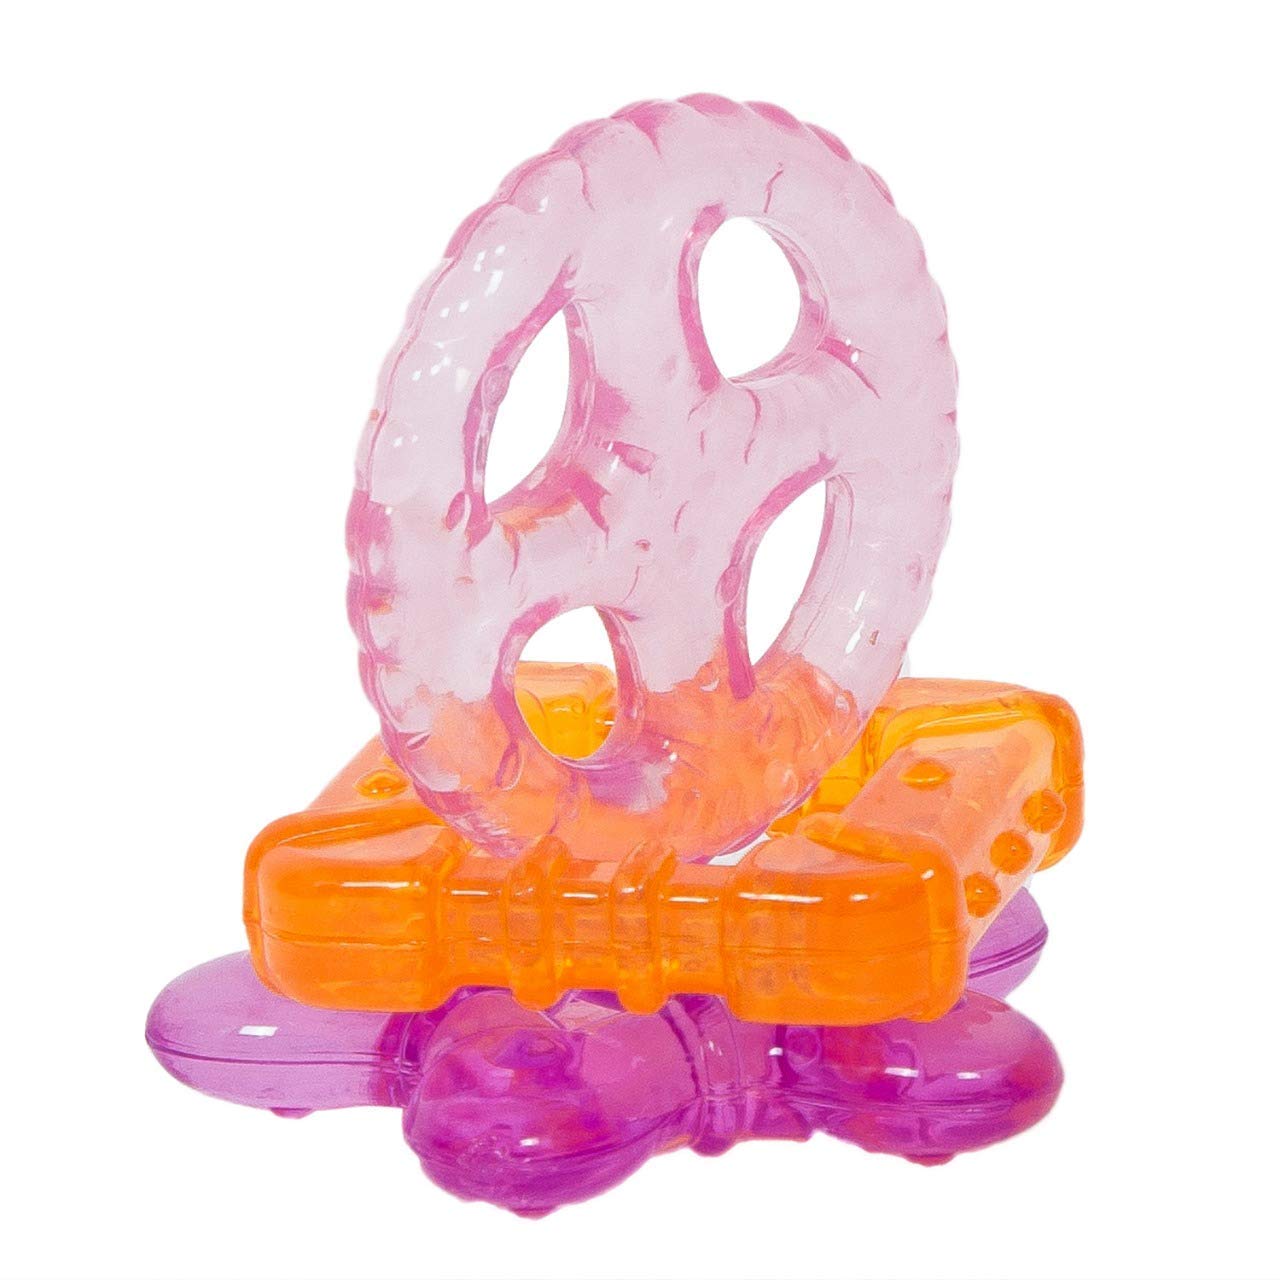 BAYBEE Natural BPA Free Silicone Teether Toy for Babies (Orange)